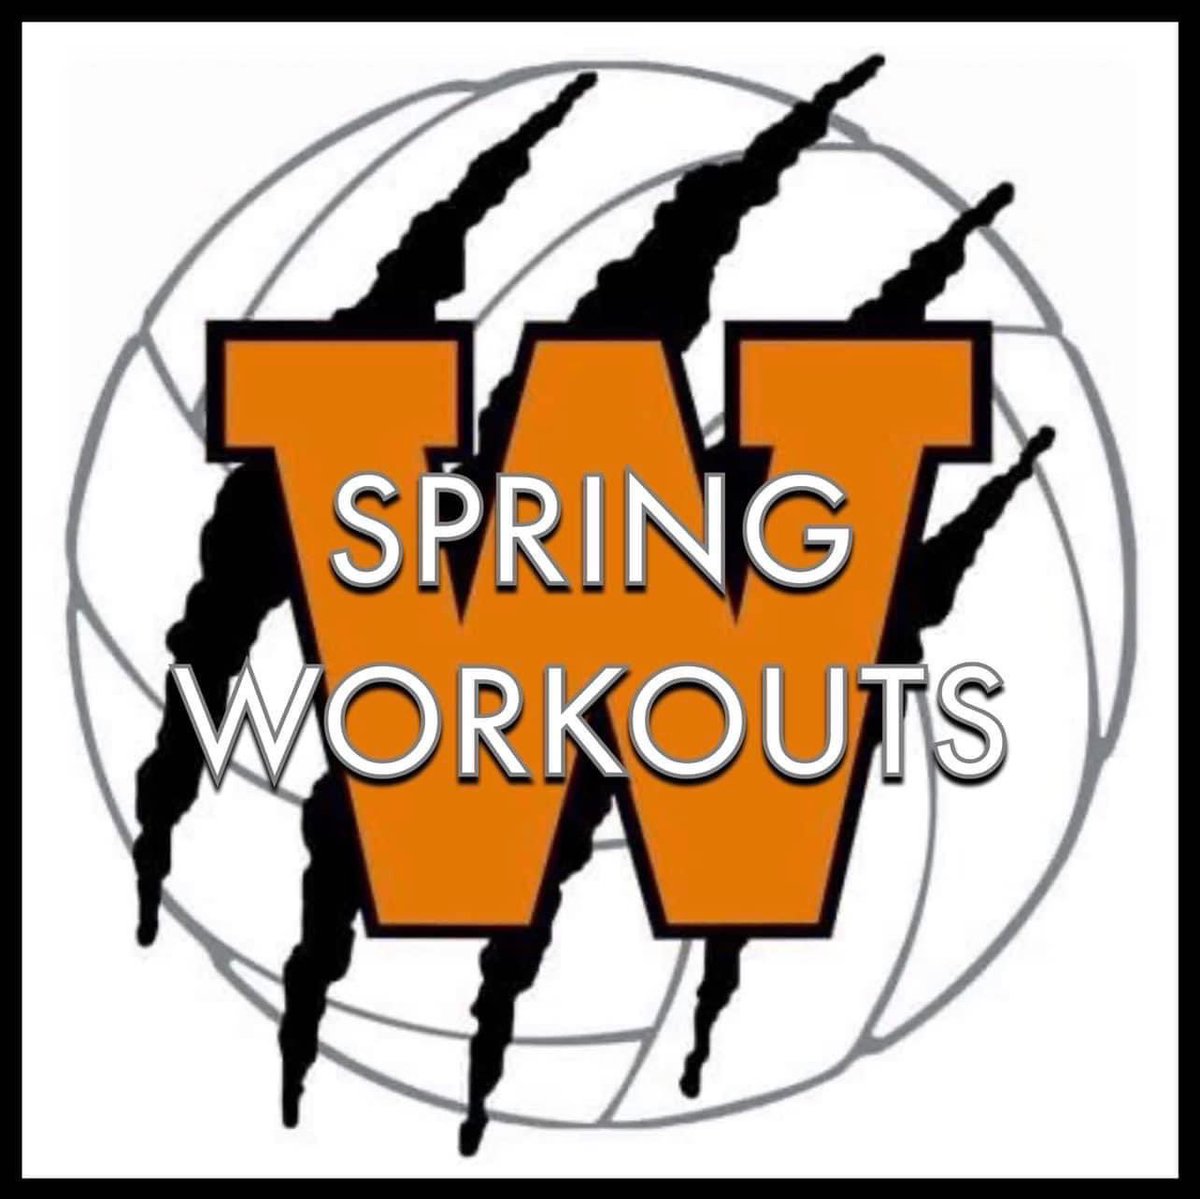 REMINDER- 

Spring Workouts TONIGHT (Wednesday, 5/1) from 6-8 pm in the Tiger Den.  Please arrive at 5:30 pm through Door 22 for set up.

We only have 2 more open gyms after tonight…hope you can join us! 

Go Tigers! 🧡🖤 #TigerFamily #WeAreWarsaw #OnTheProwl